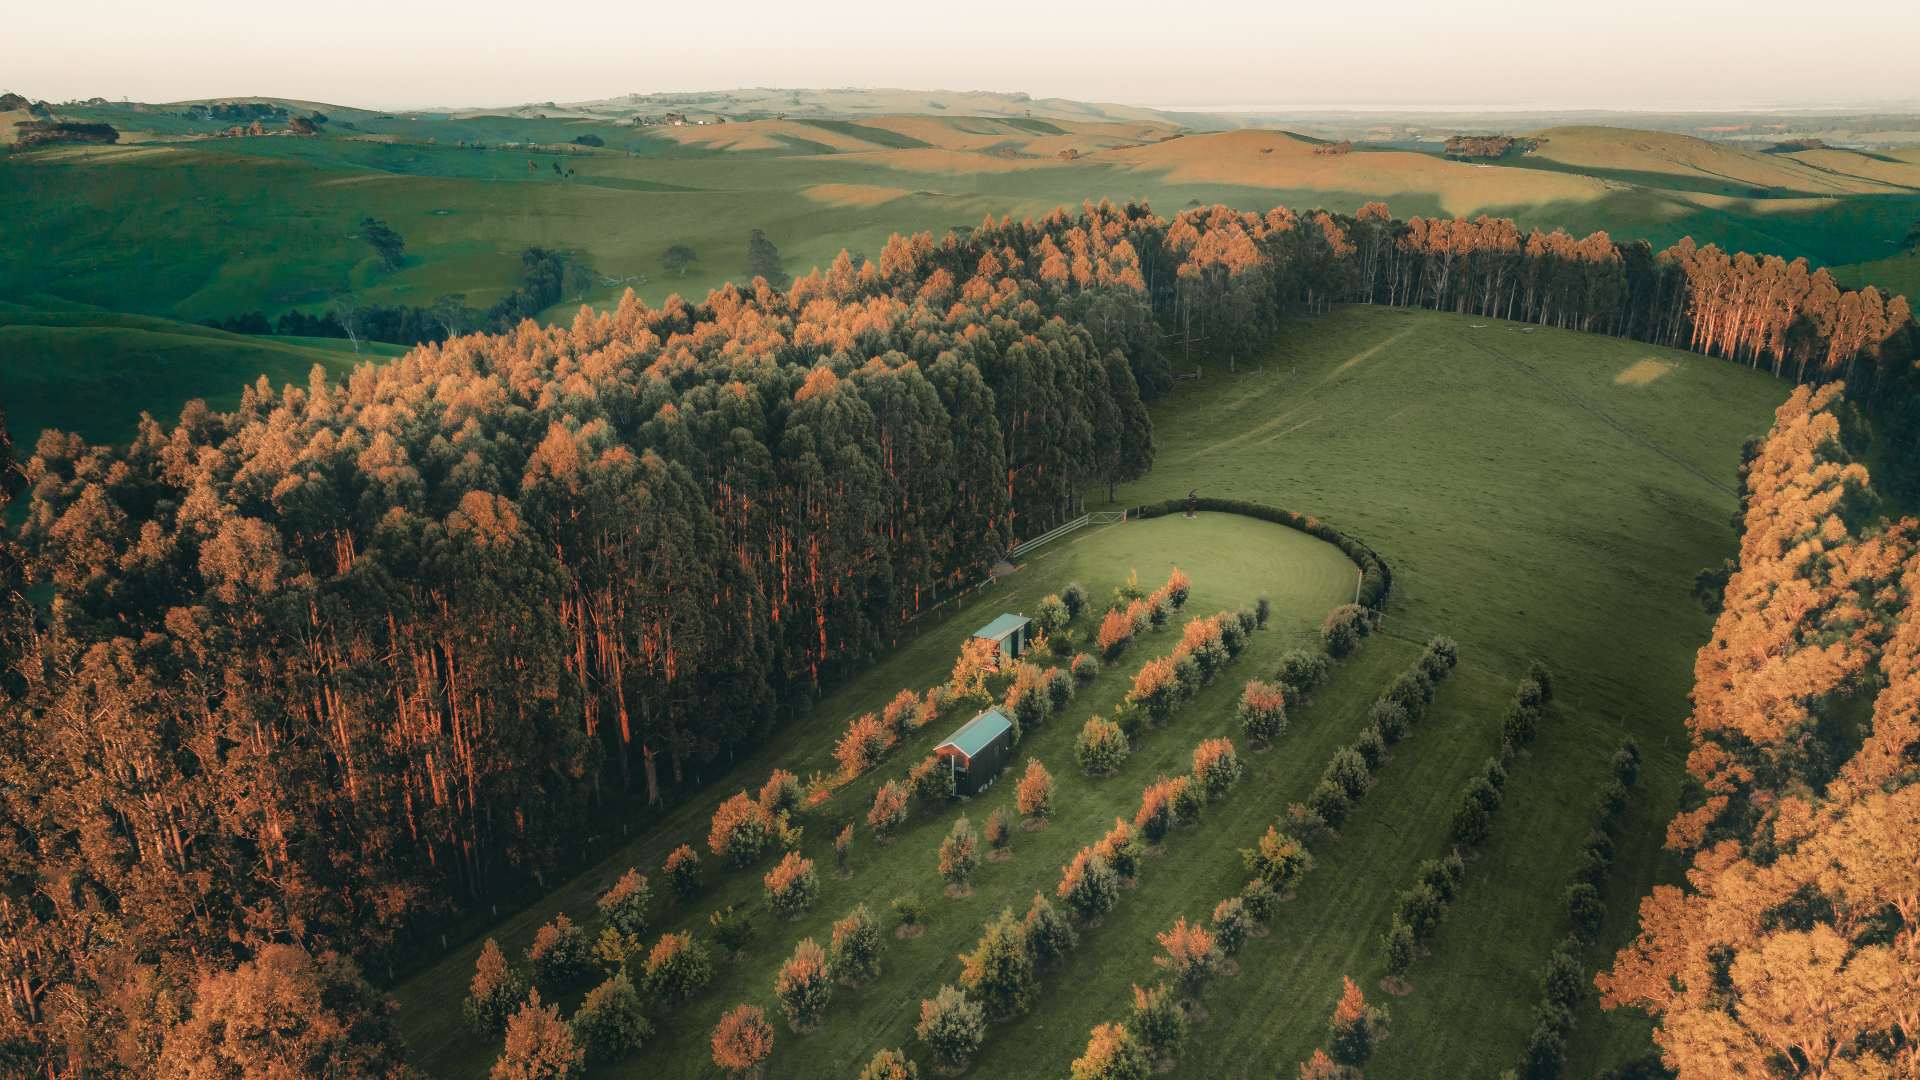 A Tiny House Nestled in a 60-Acre Olive Grove and Eucalyptus Forest Has Popped Up in Gippsland